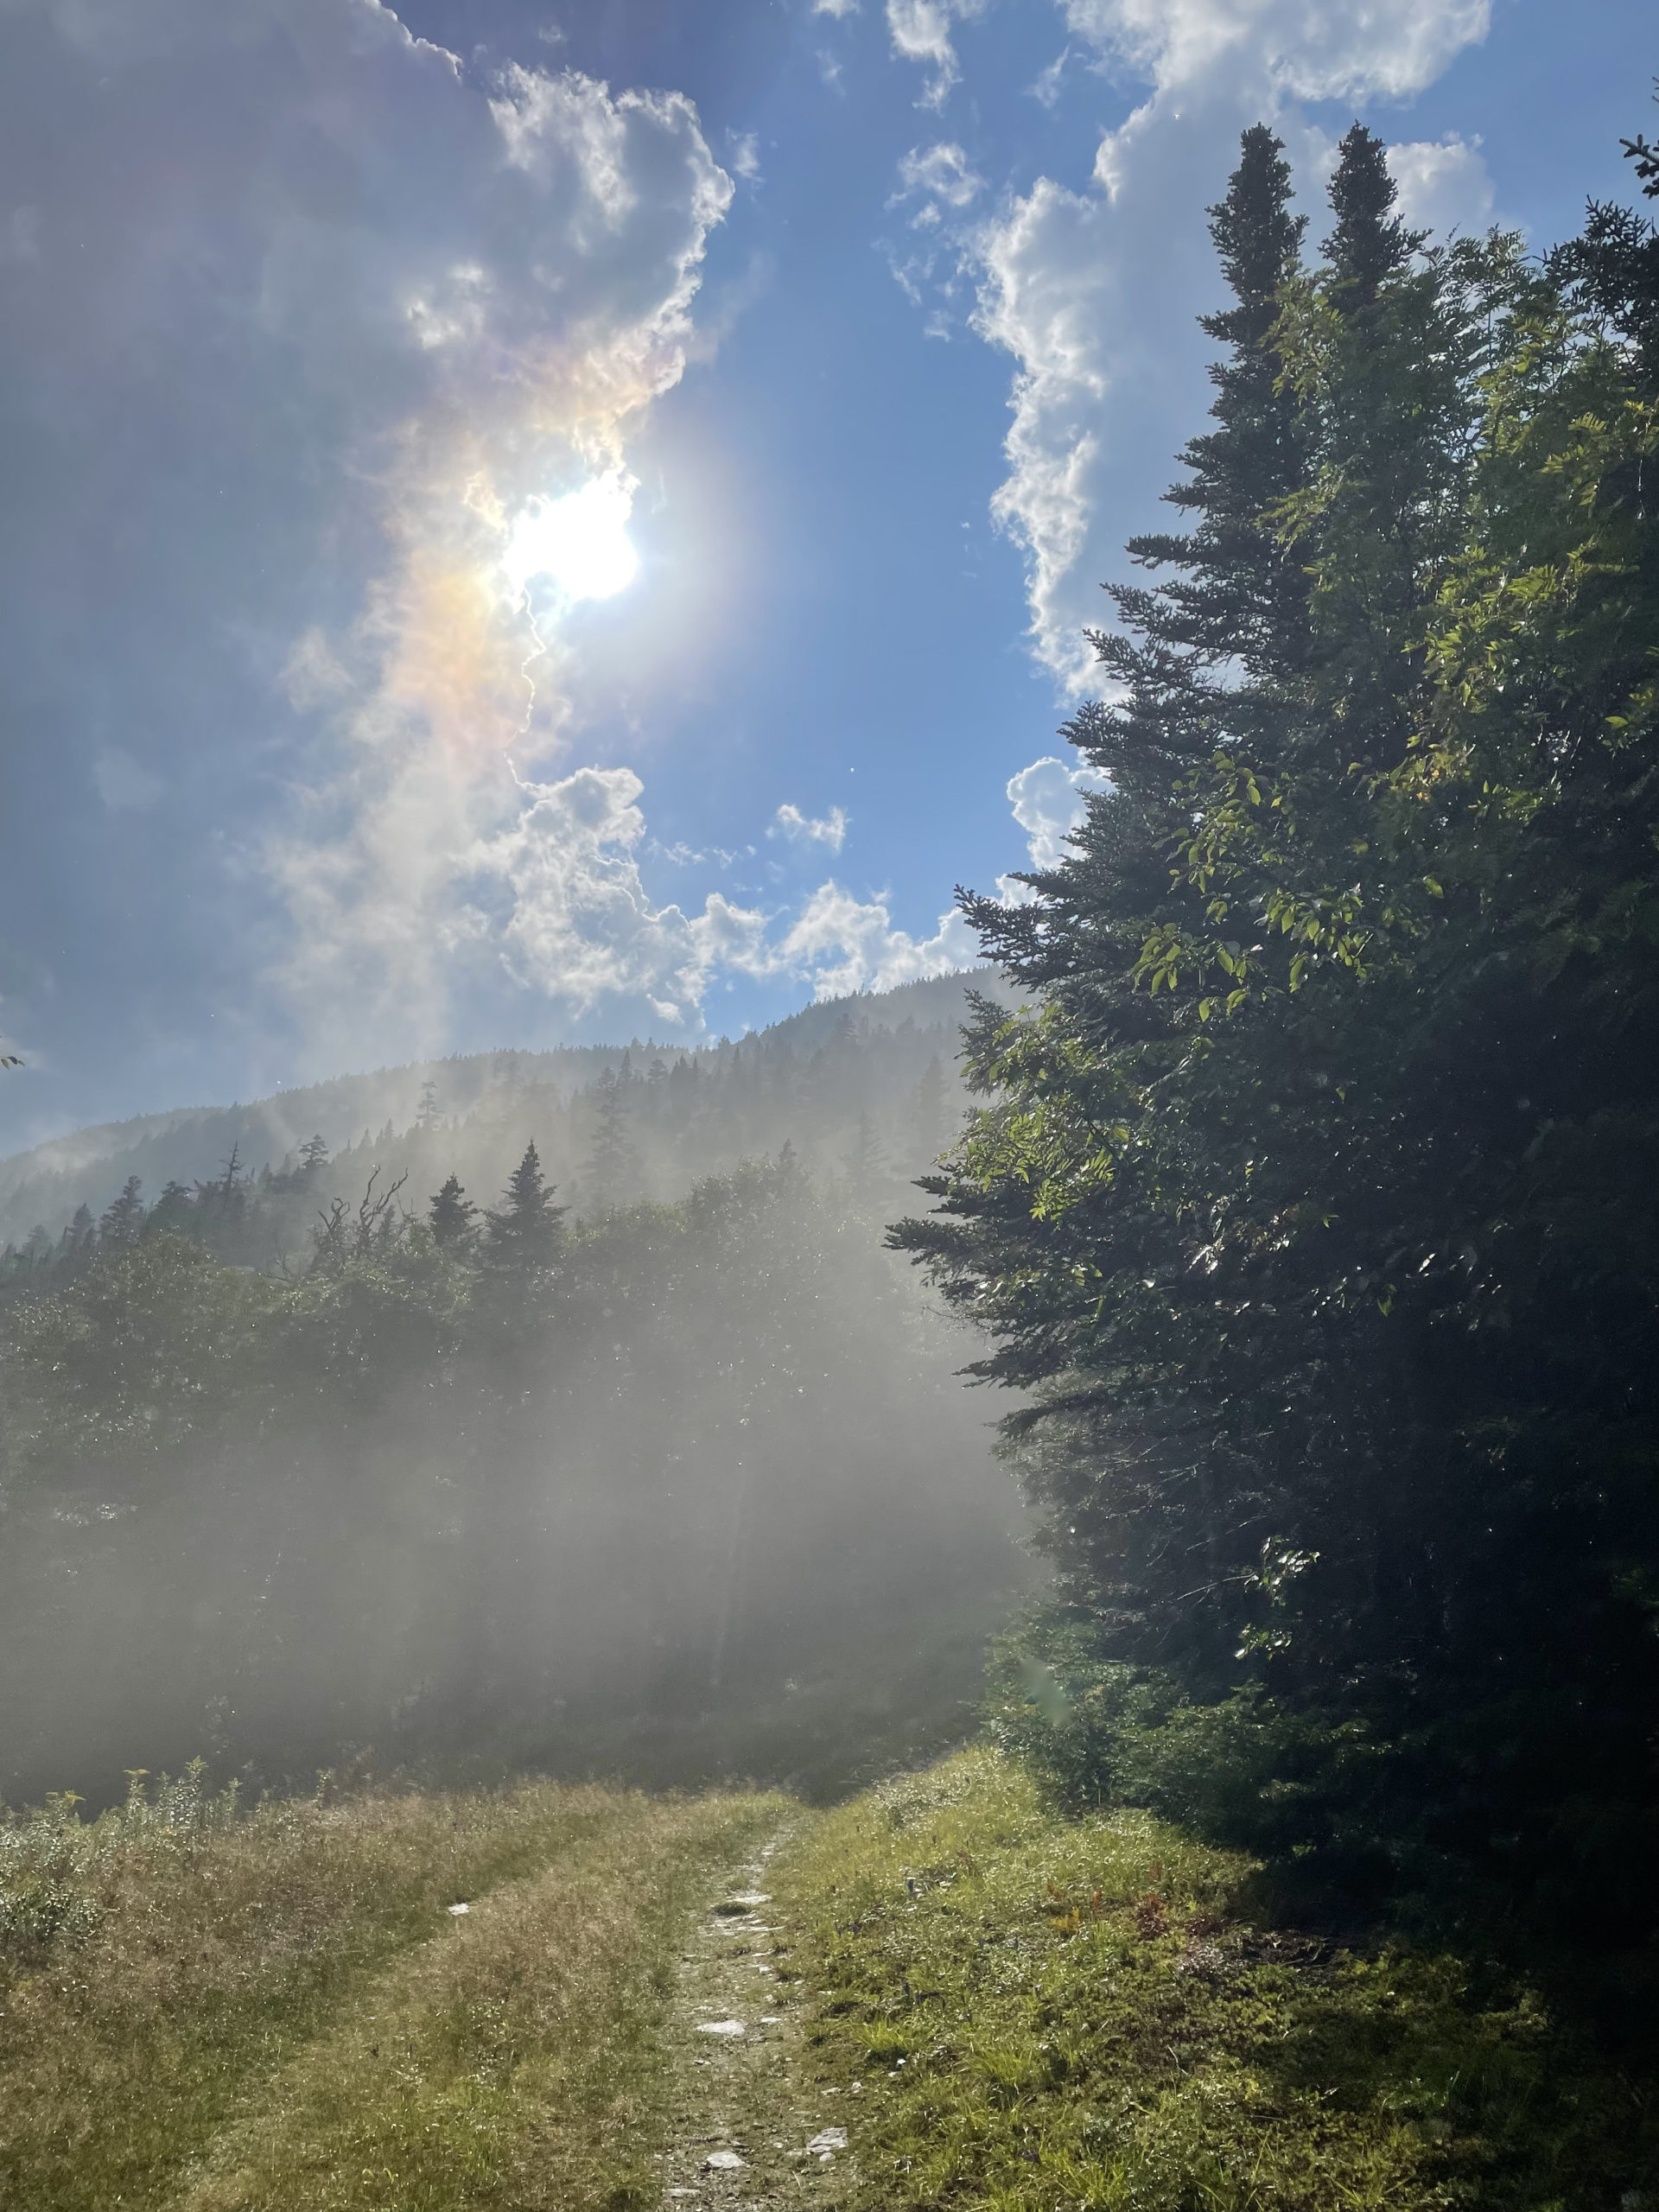 Sunny rain storm, seen while hiking Mt Ellen and Mt Abraham, Green Mountains, Vermont